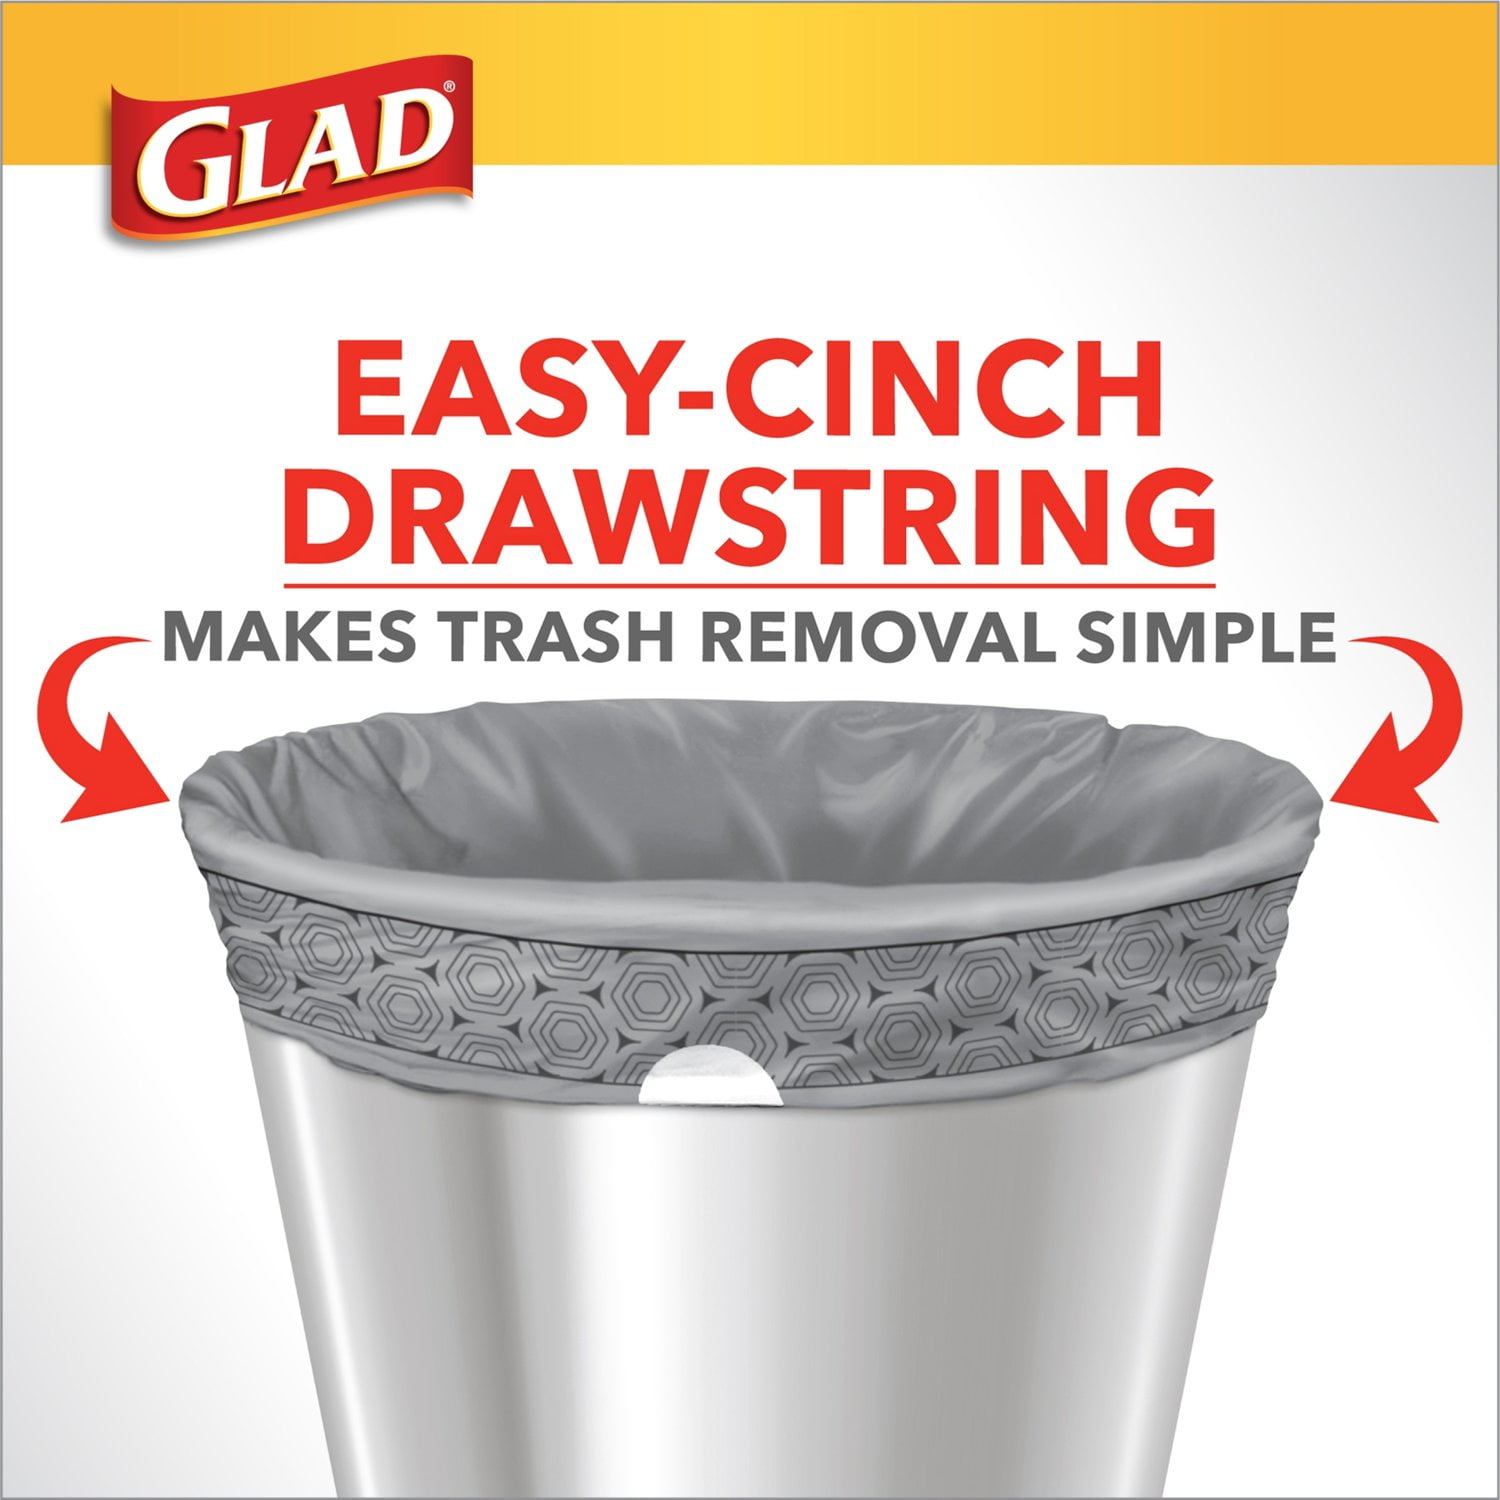 Glad Drawstring 8 Gallon Trash Bags - Fresh Clean - Pack of 80 for sale  online